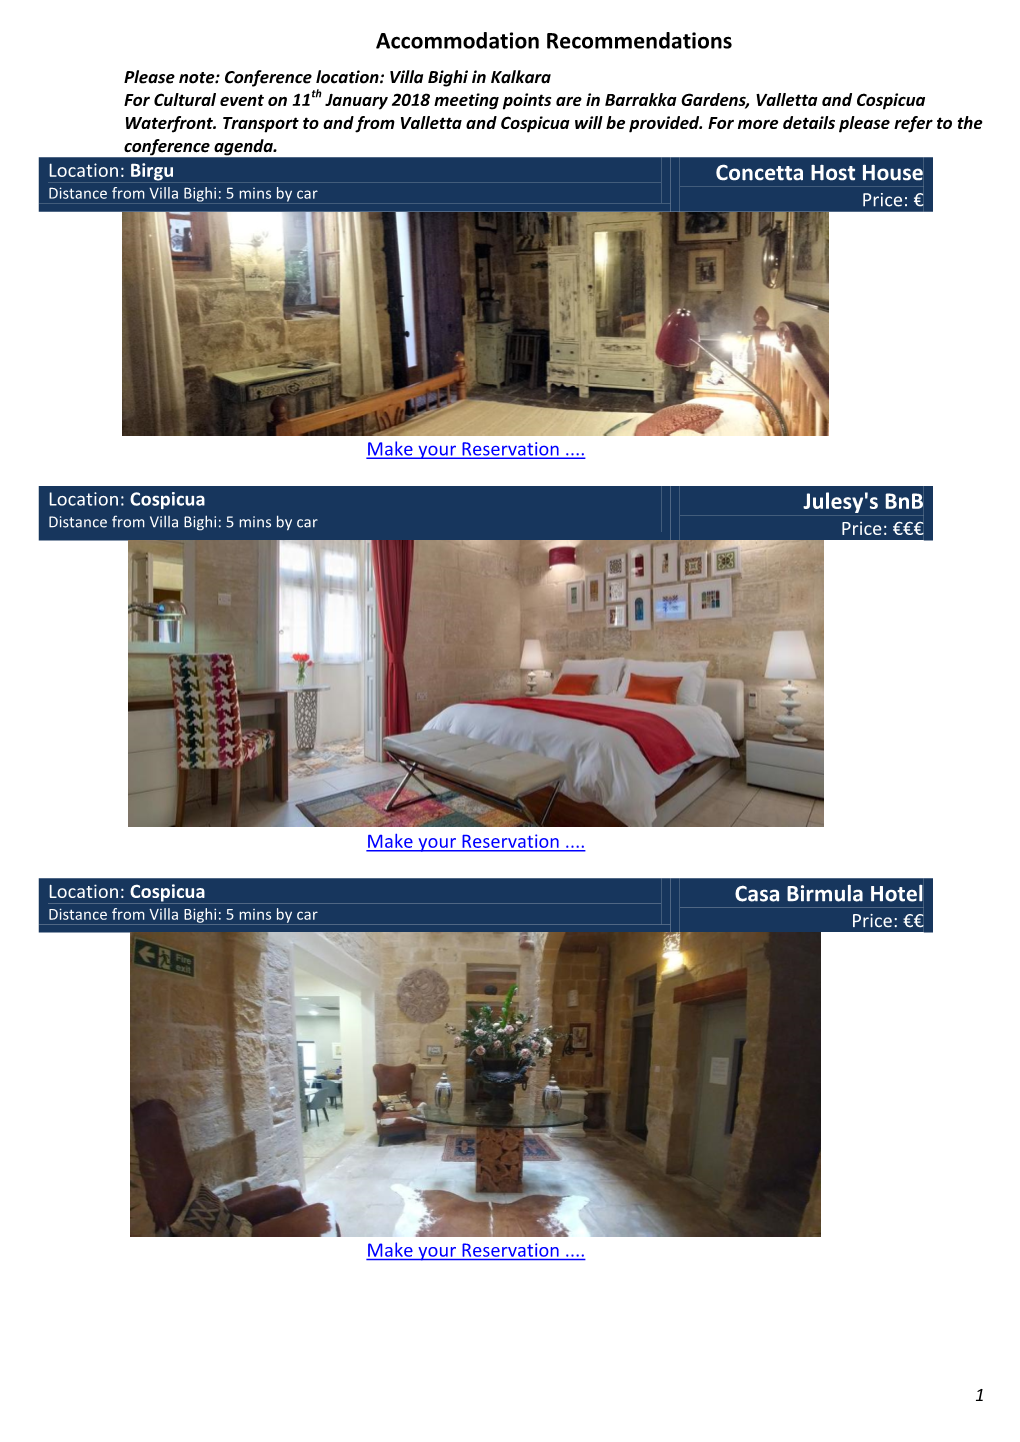 Accommodation Recommendations Concetta Host House Julesy's Bnb